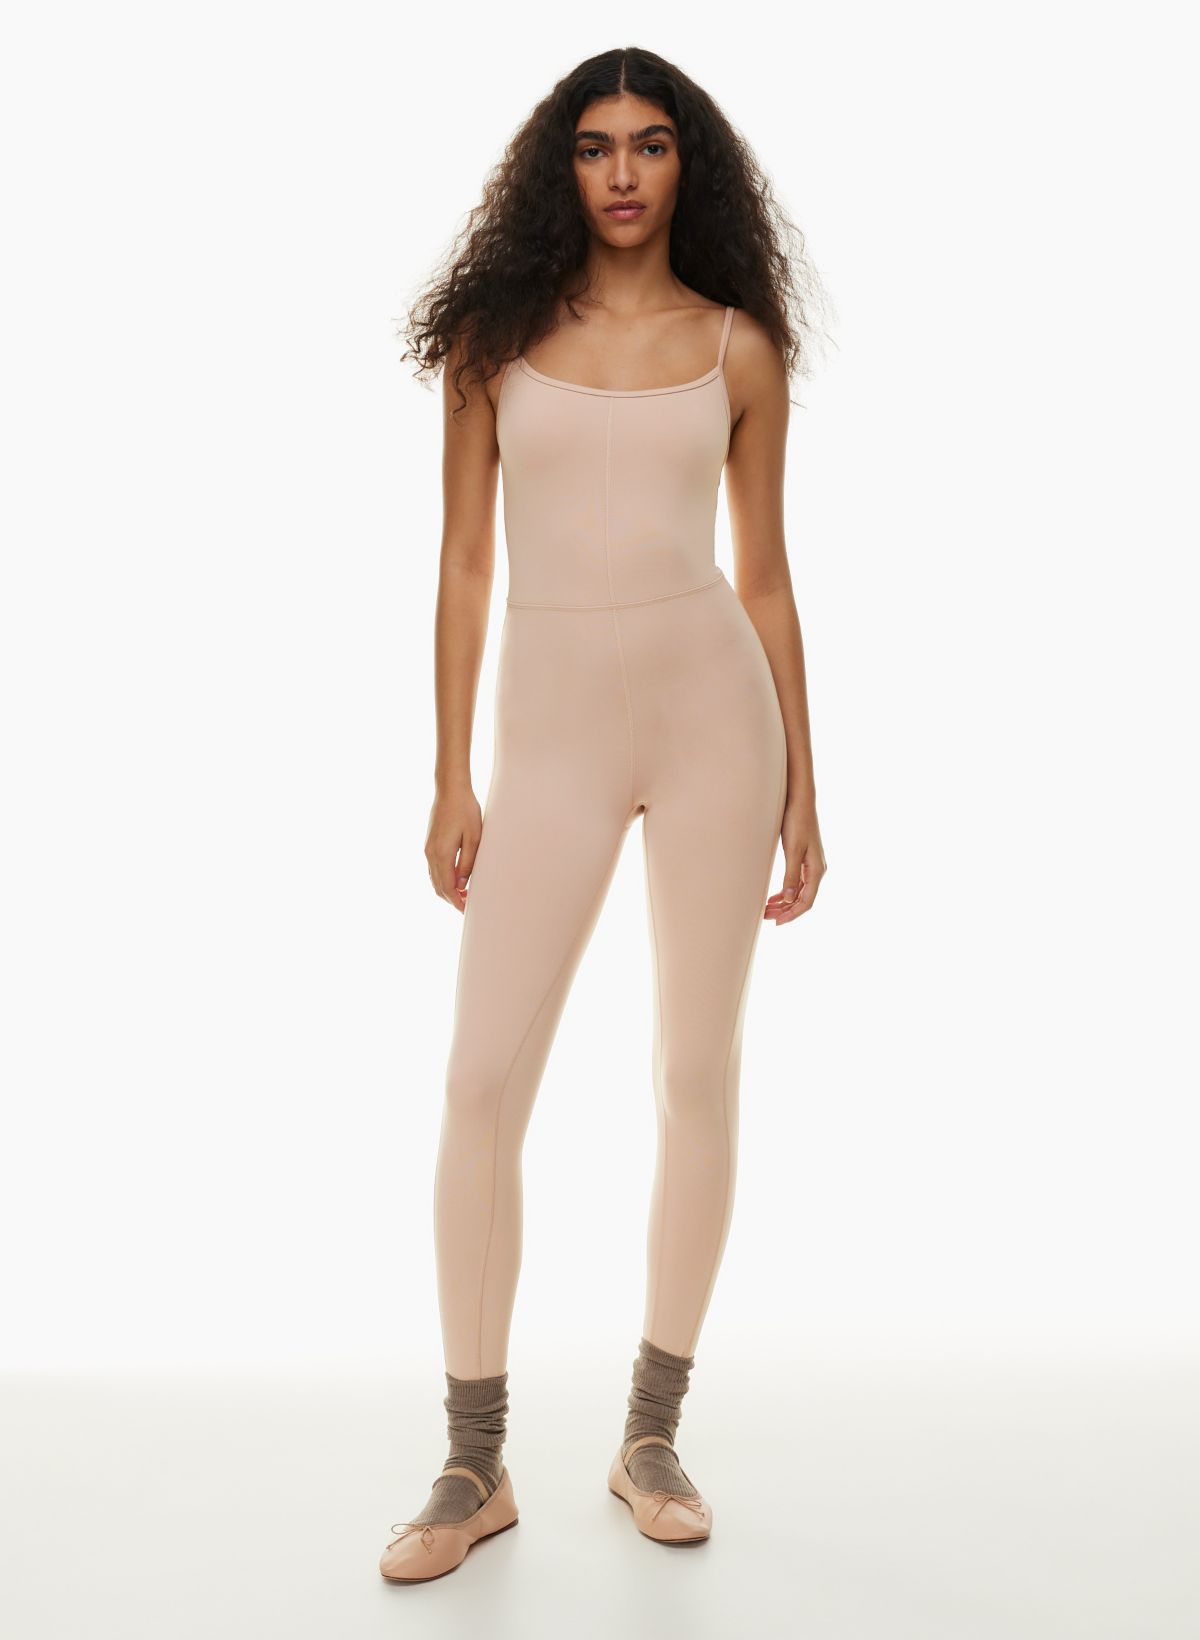 5 ways to style Aritzia Divinity Jumpsuit. This Aritzia jumpsuit is a